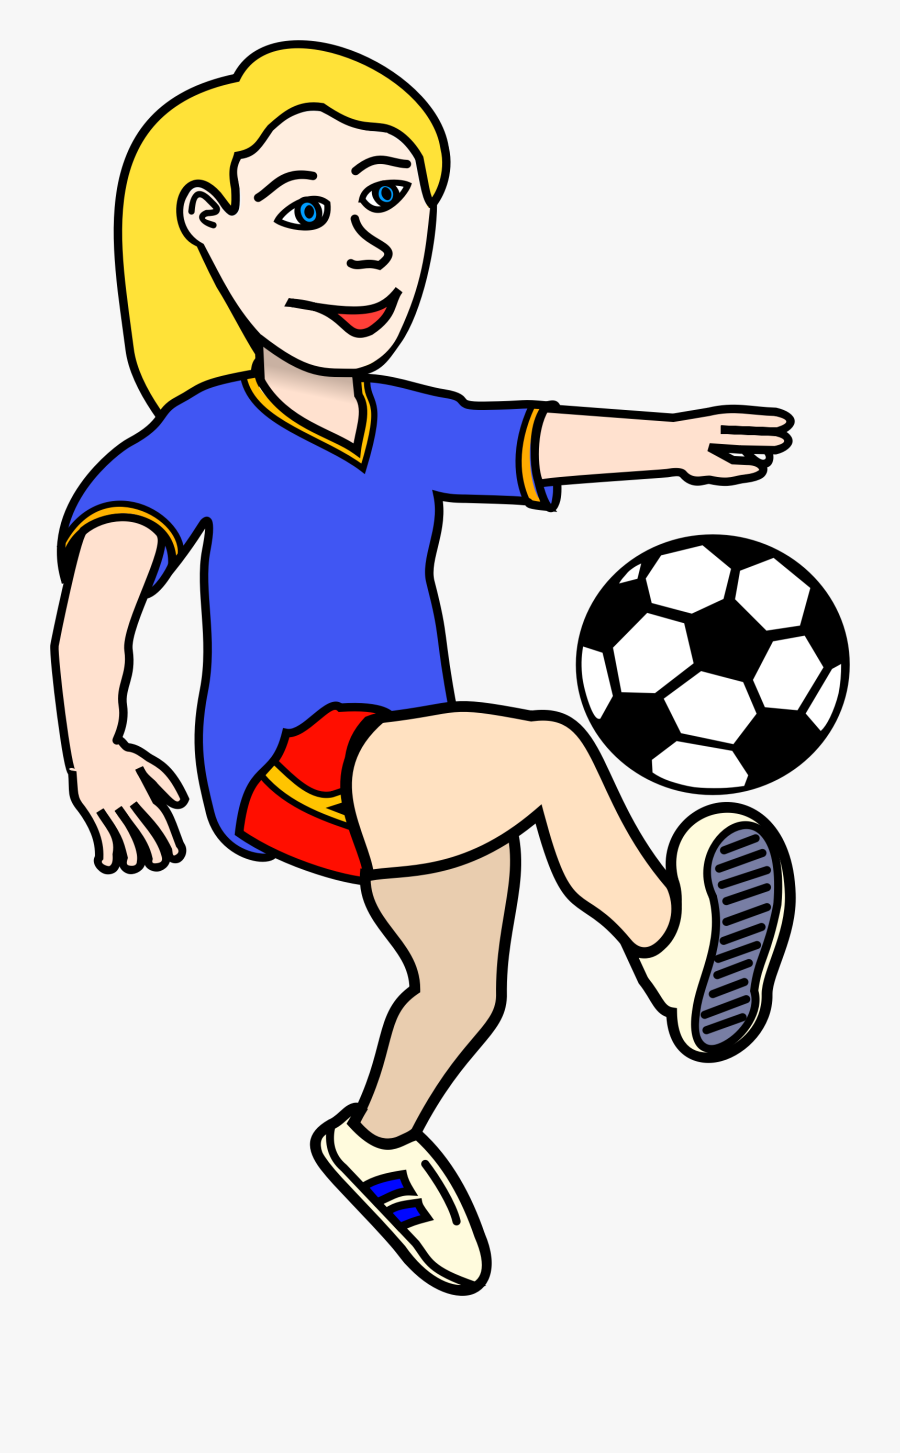 Fancy Design Clipart Soccer Player Playing Girl Coloured - Kick Clipart Black And White, Transparent Clipart